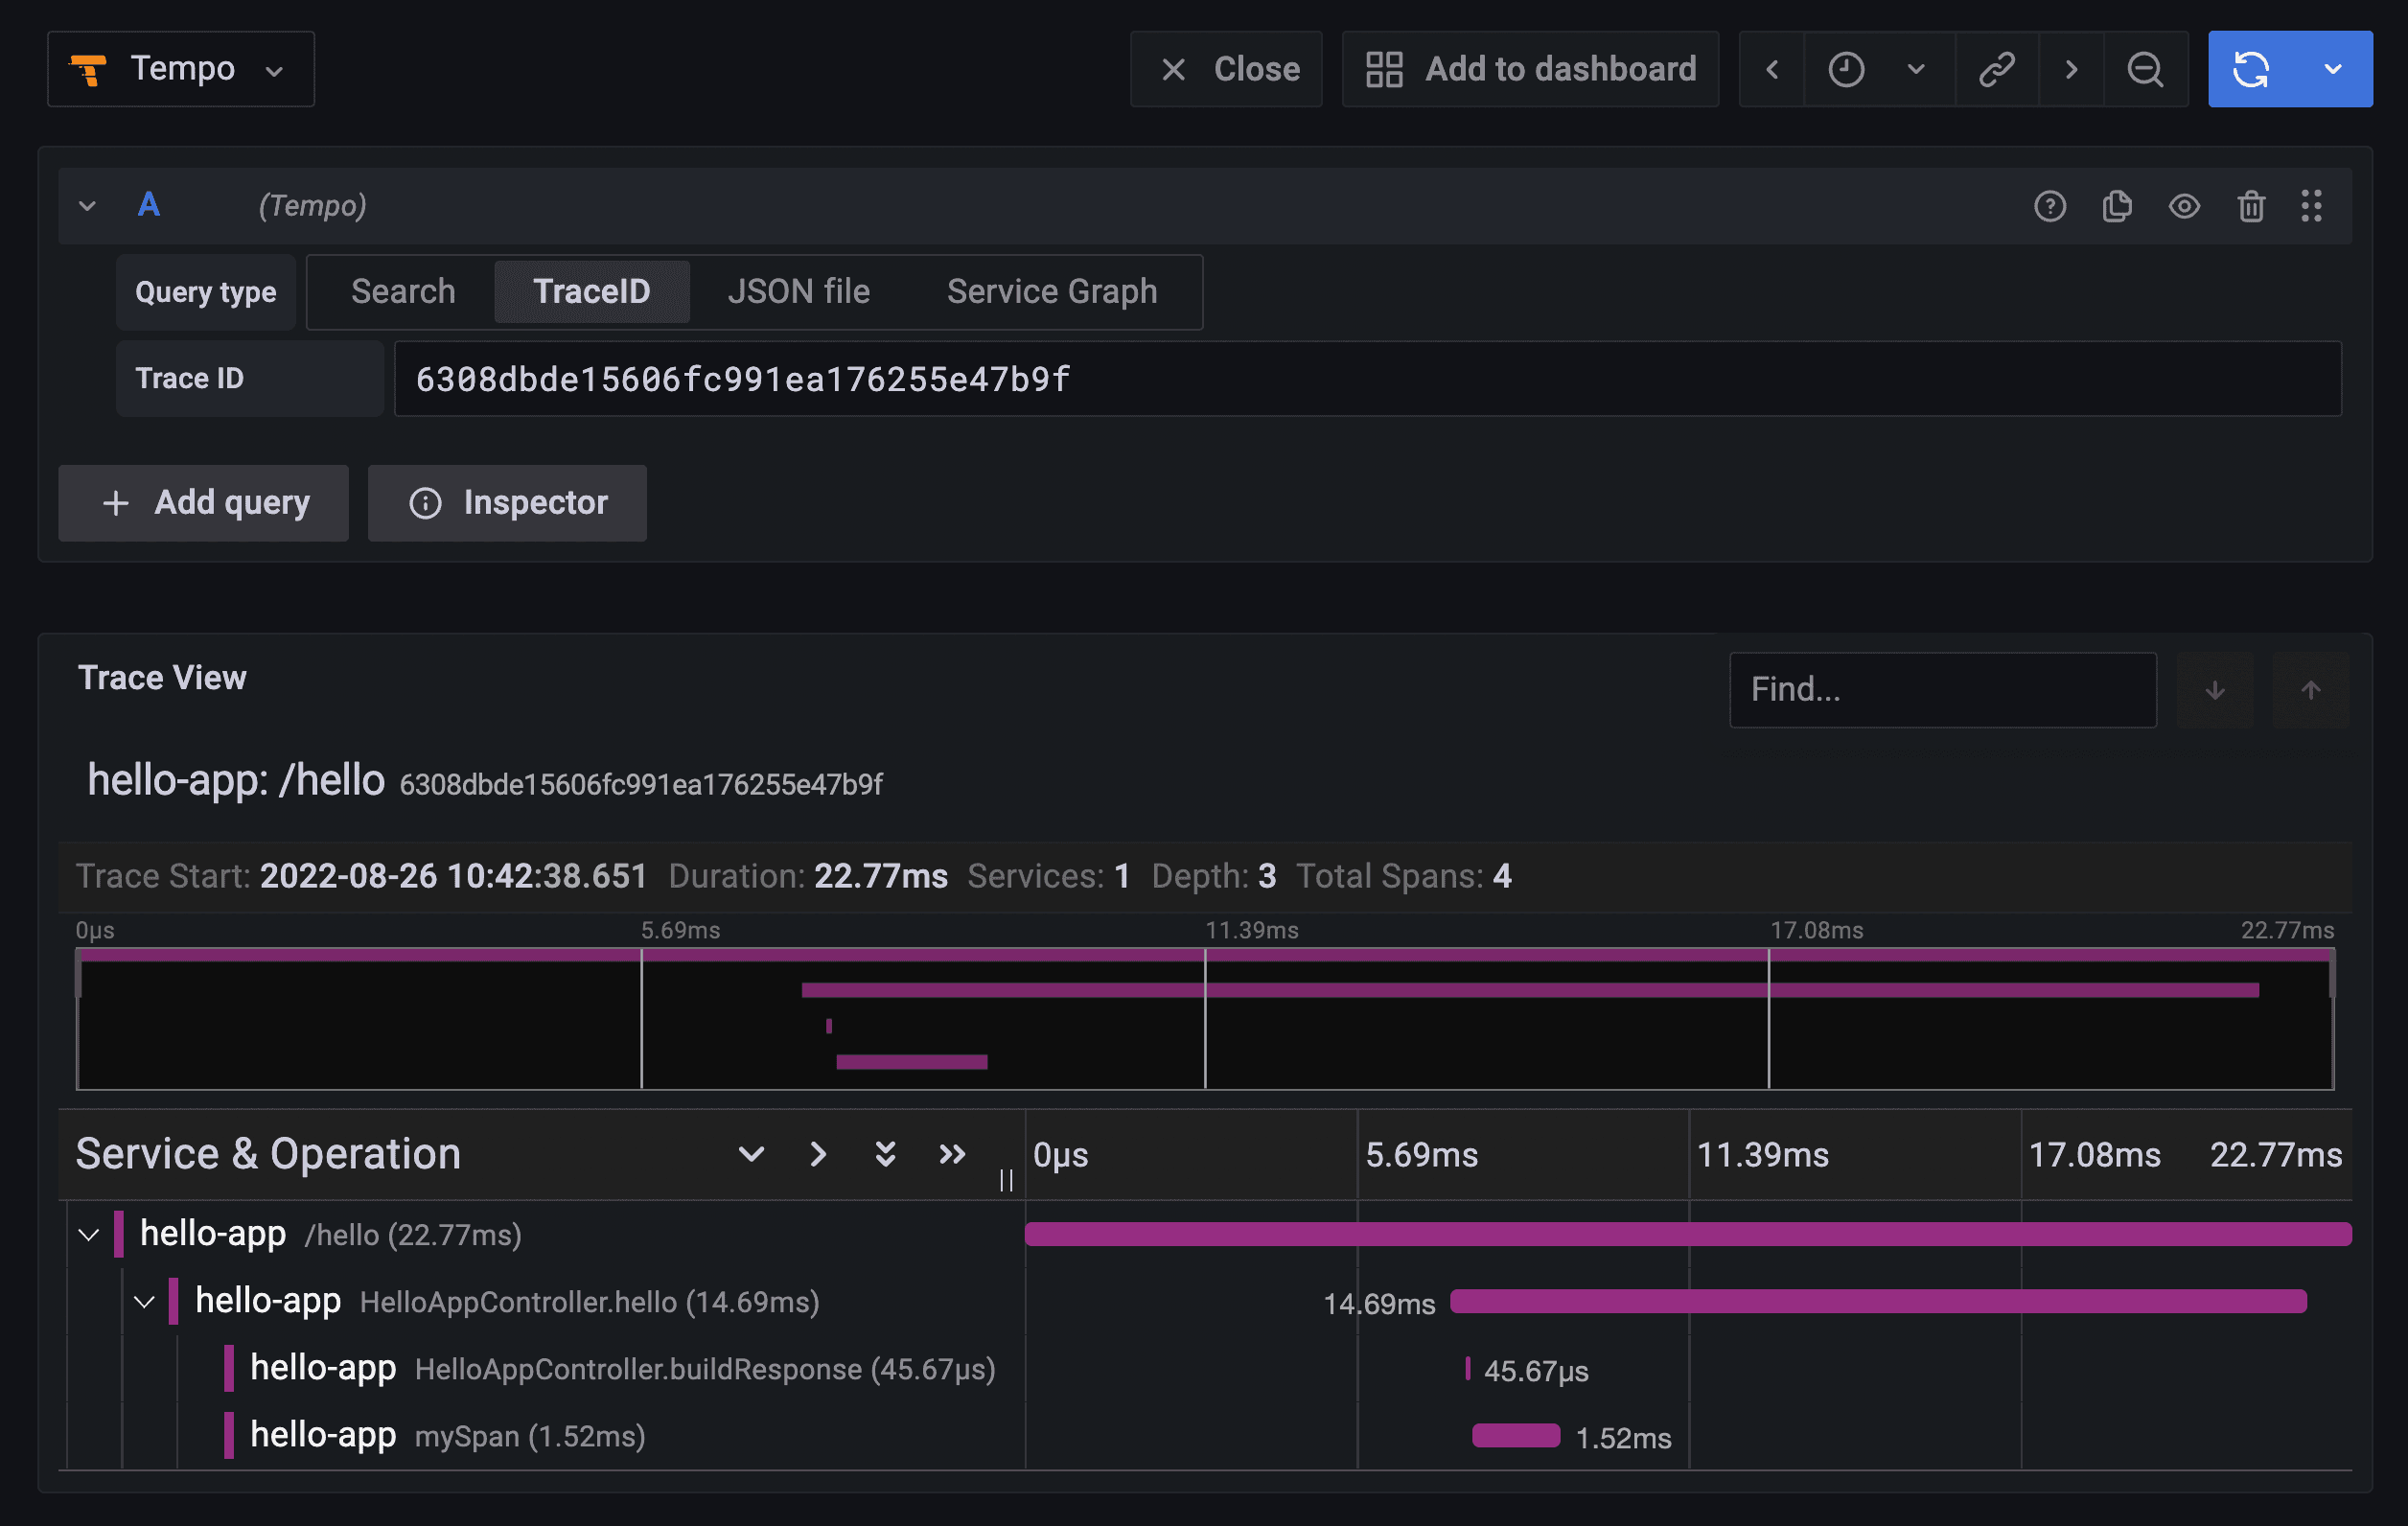 Selected trace showing details for the complete trace timeline